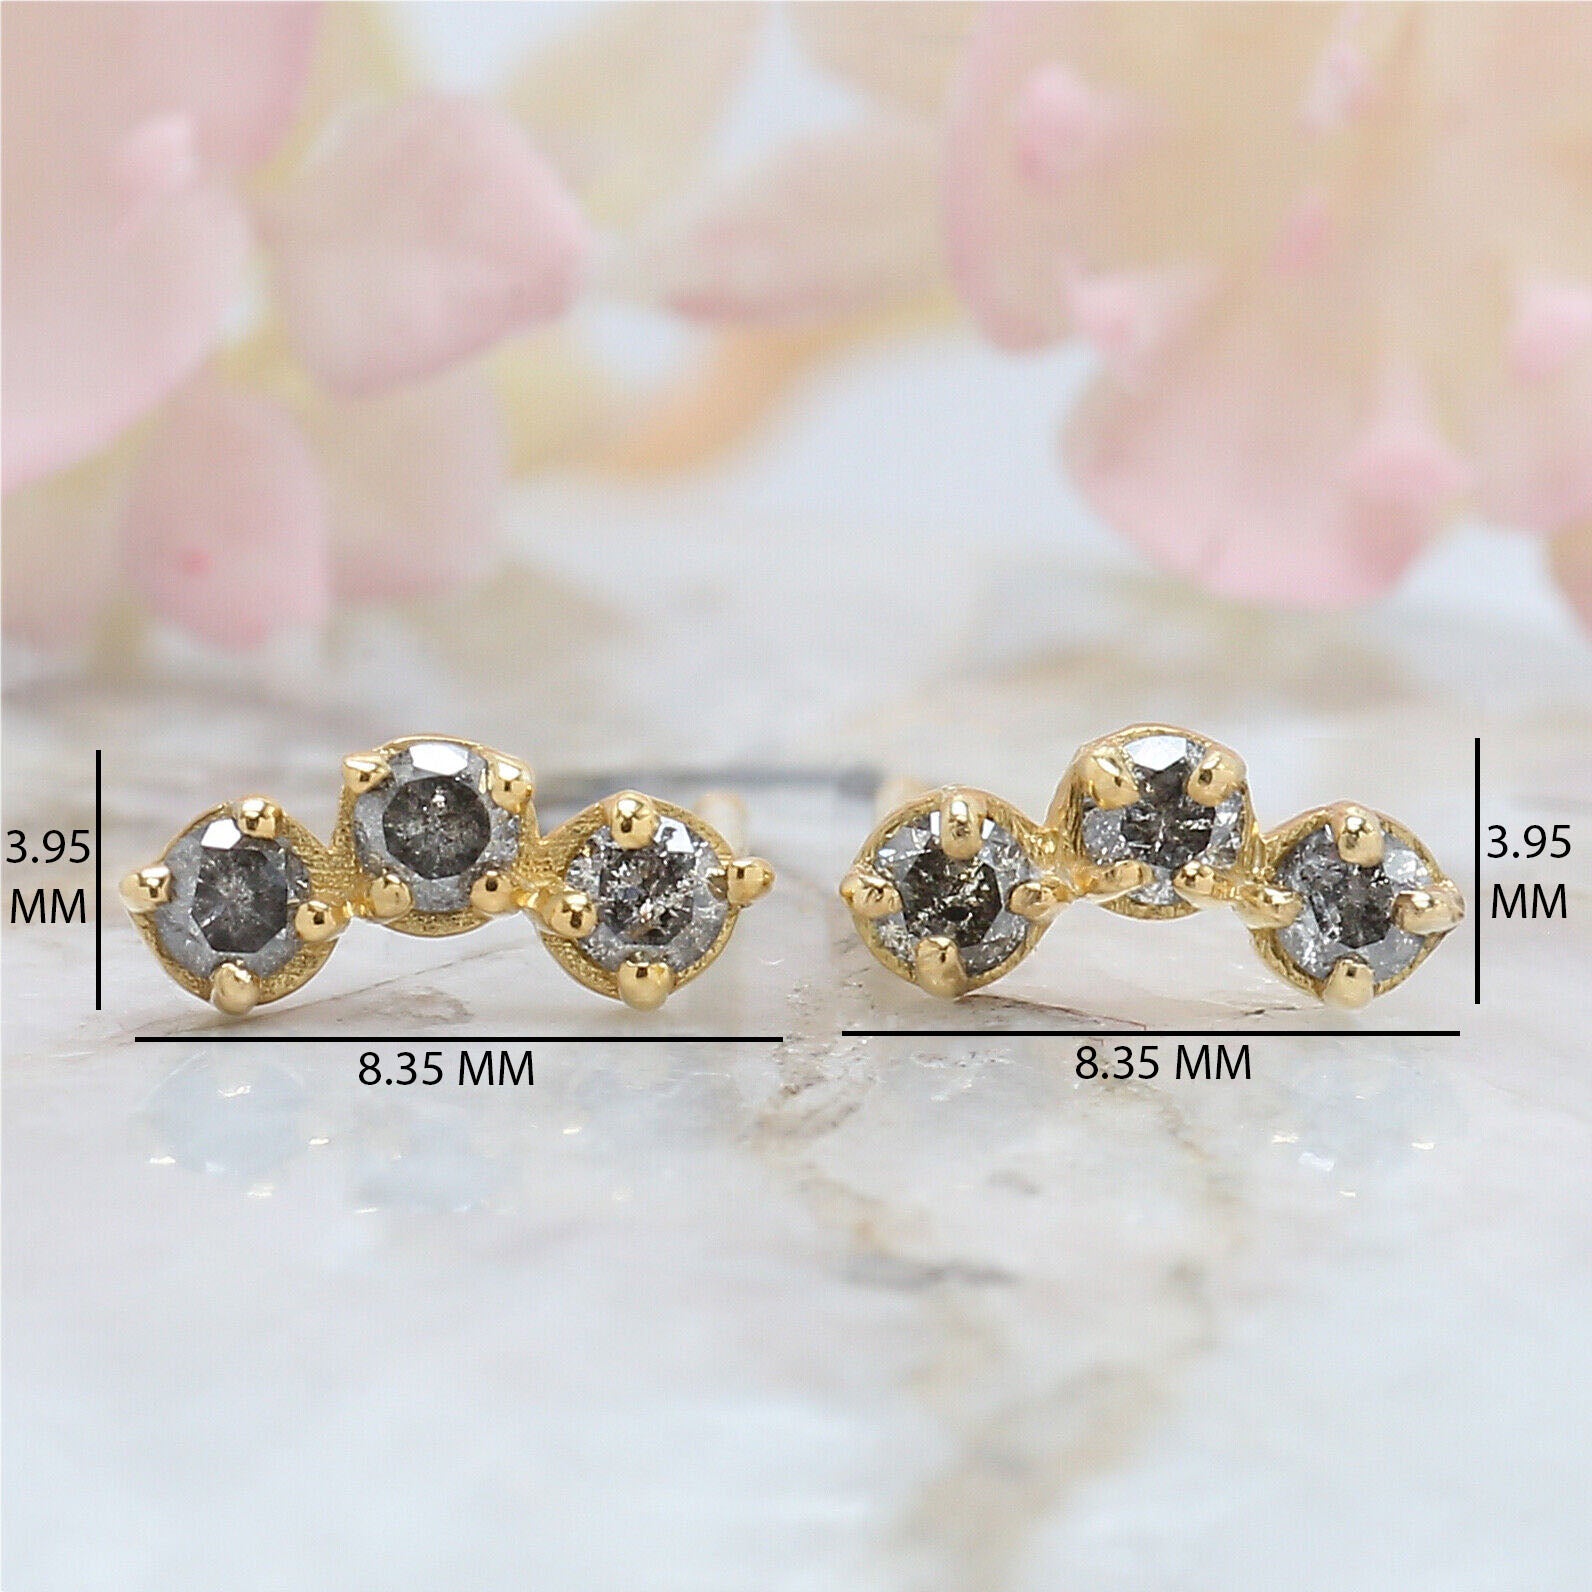 Salt And Pepper Round Diamond Earring 14K Solid Rose White Yellow Gold Engagement Wedding Gift Earring 0.29 CT KD942